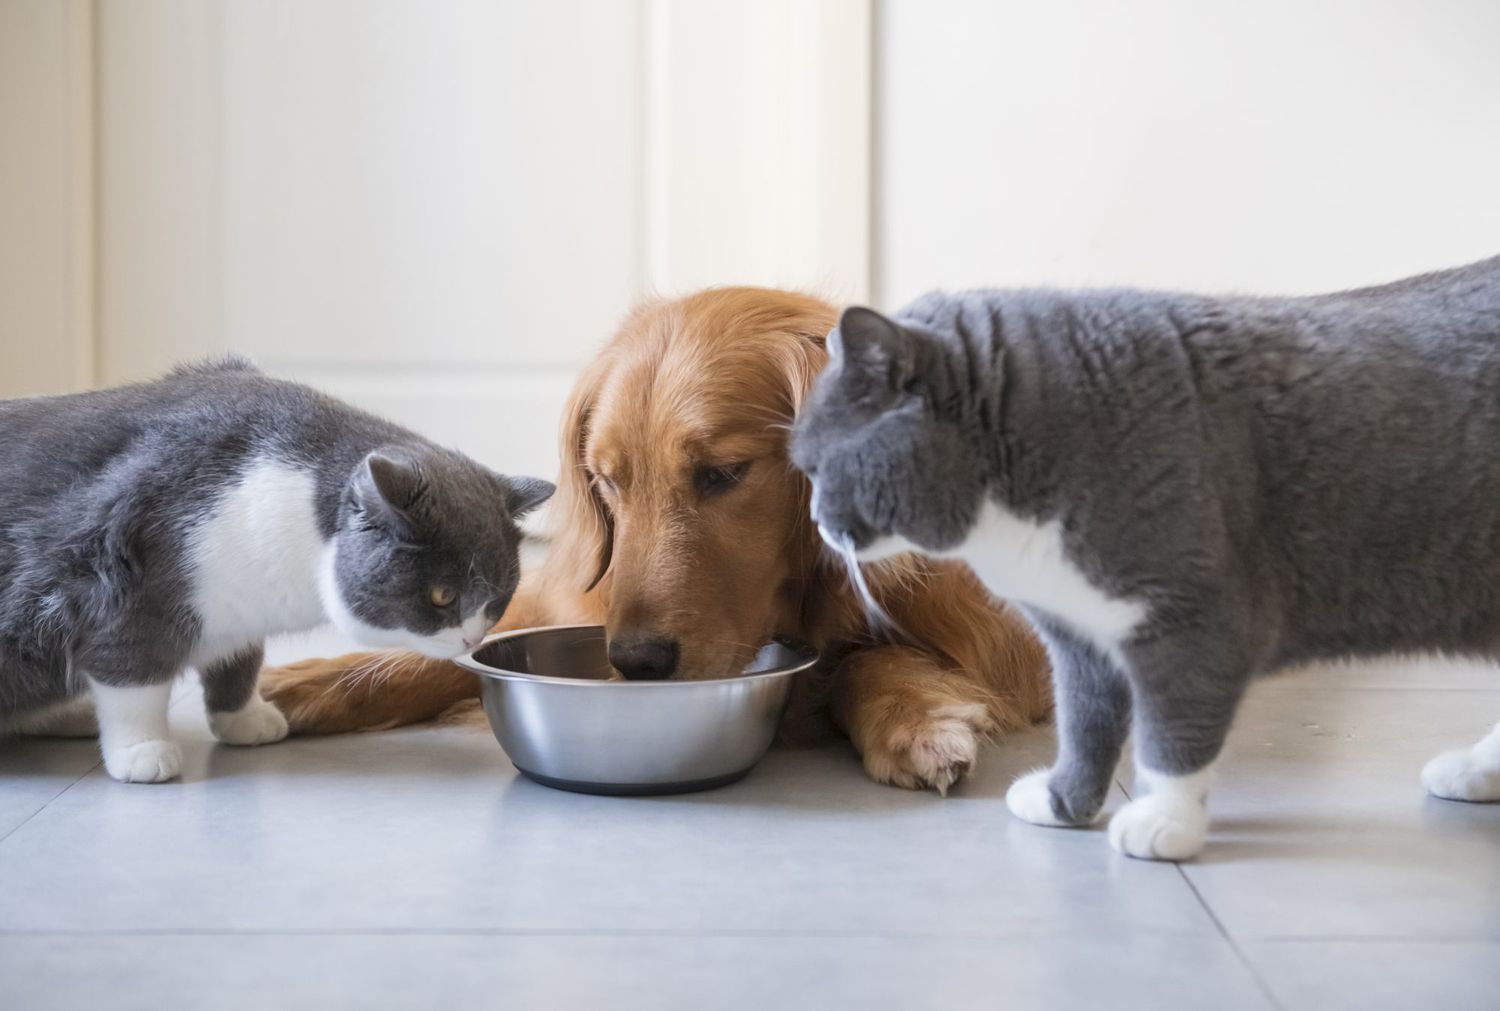 Golden Retriever dogs and two cats share food